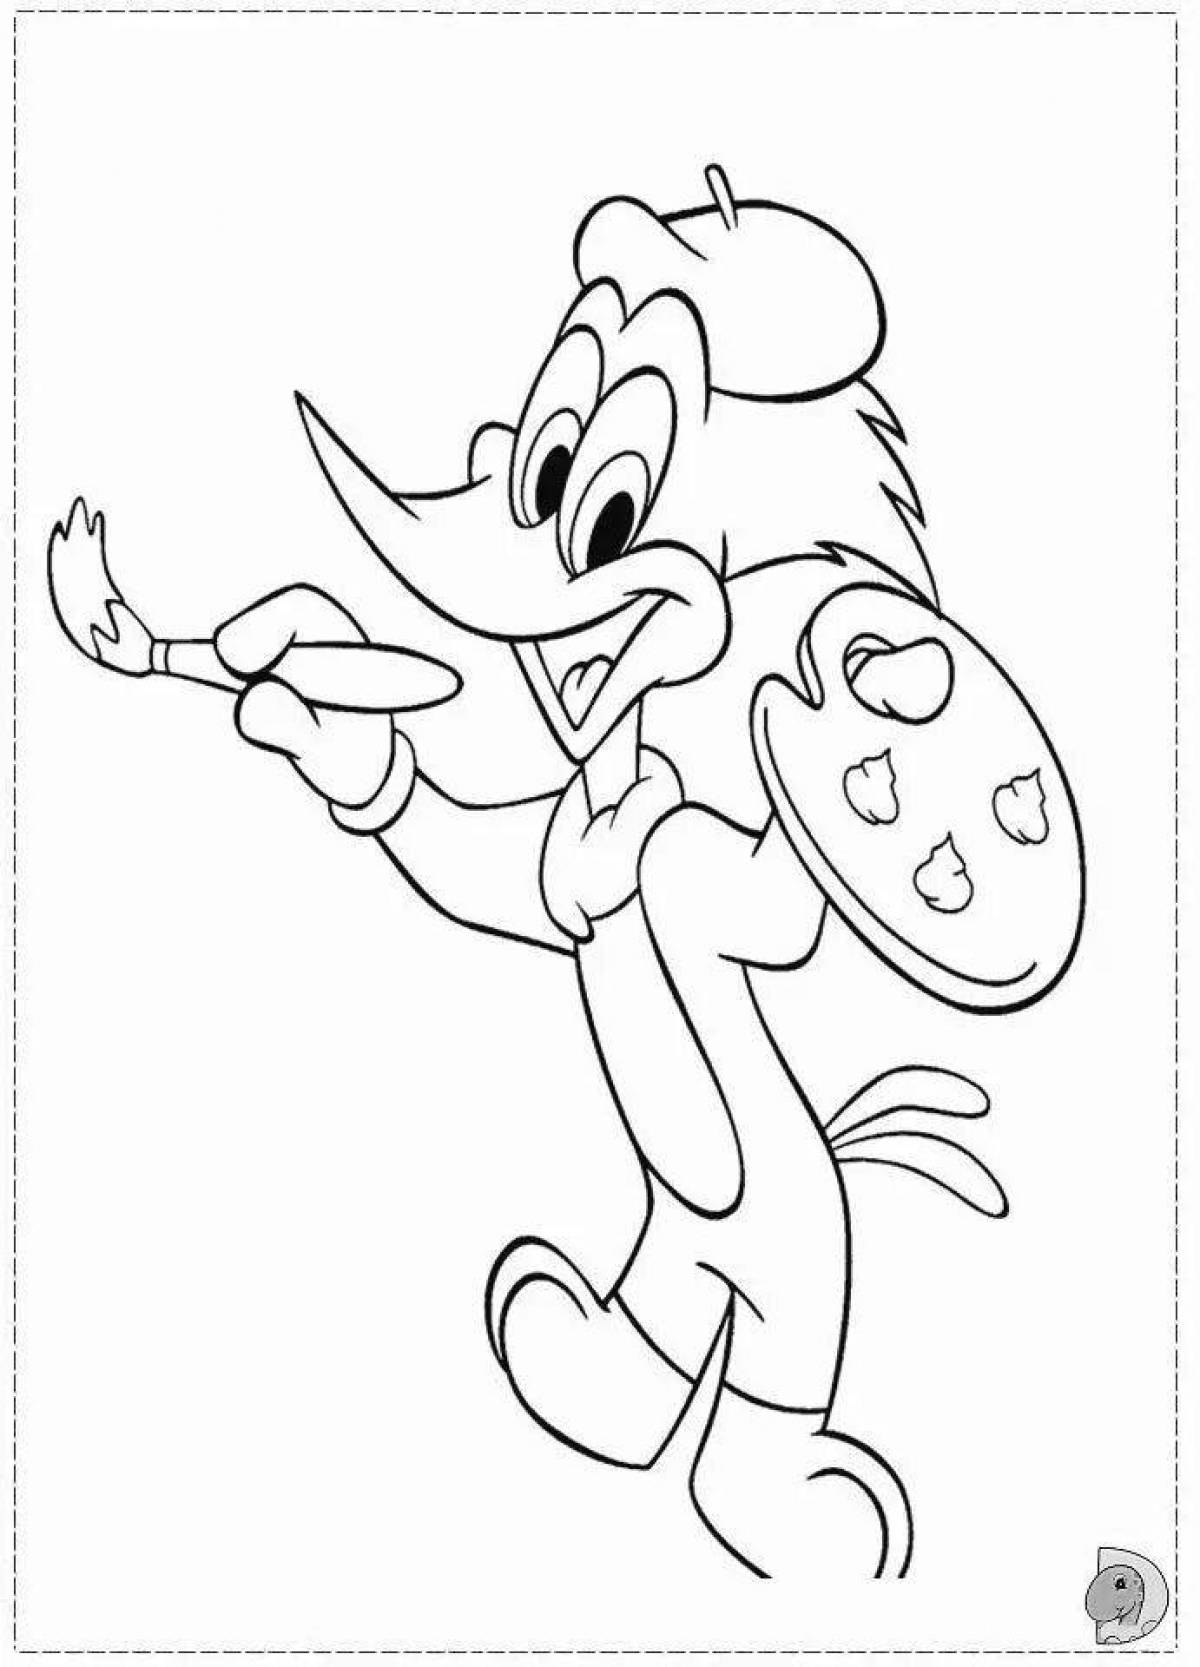 Coloring live woody woodpecker